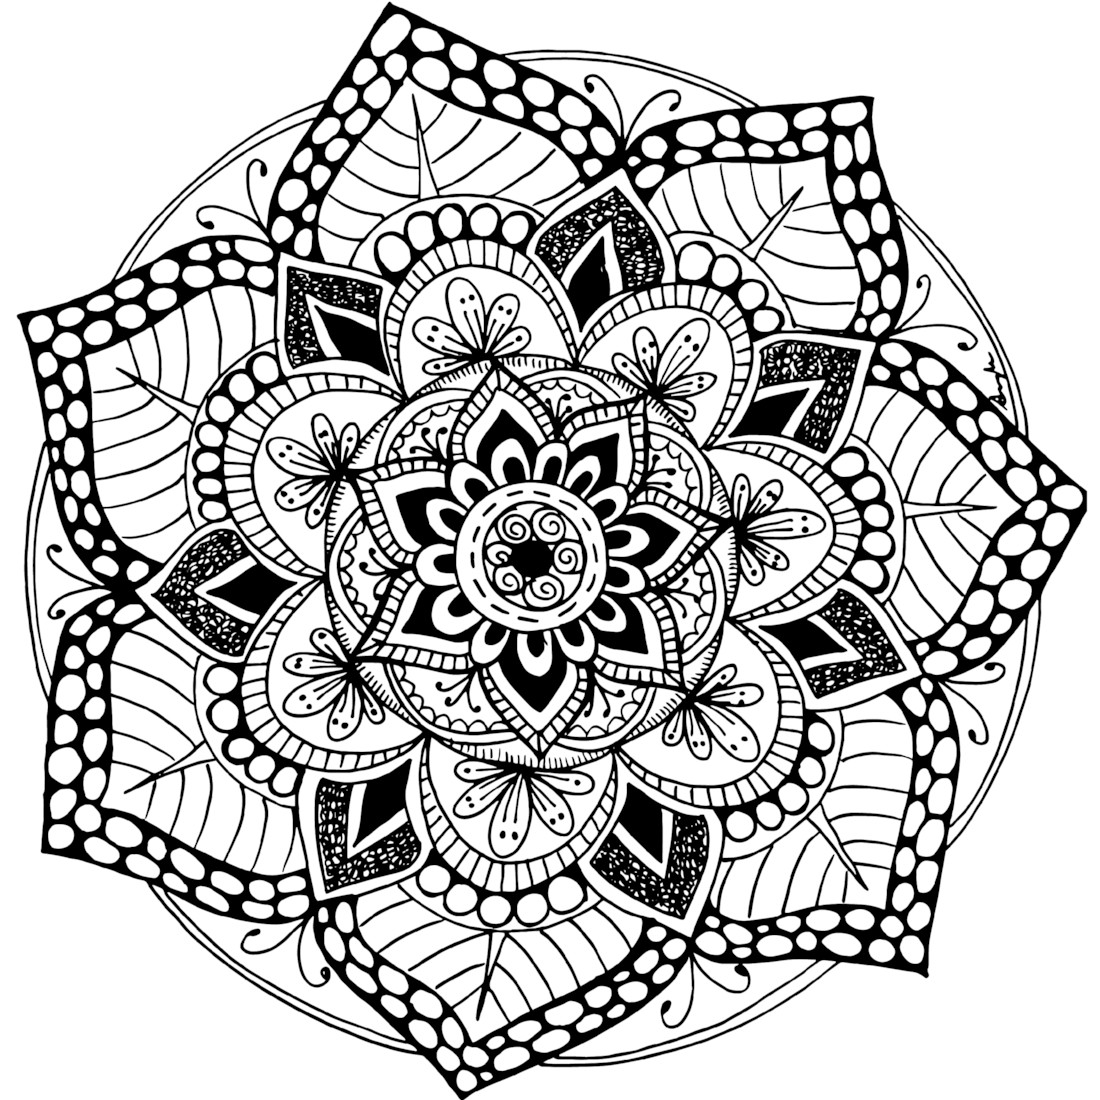 Free Mandala Coloring Pages For Adults
 A free printable mandala coloring page 60 more available